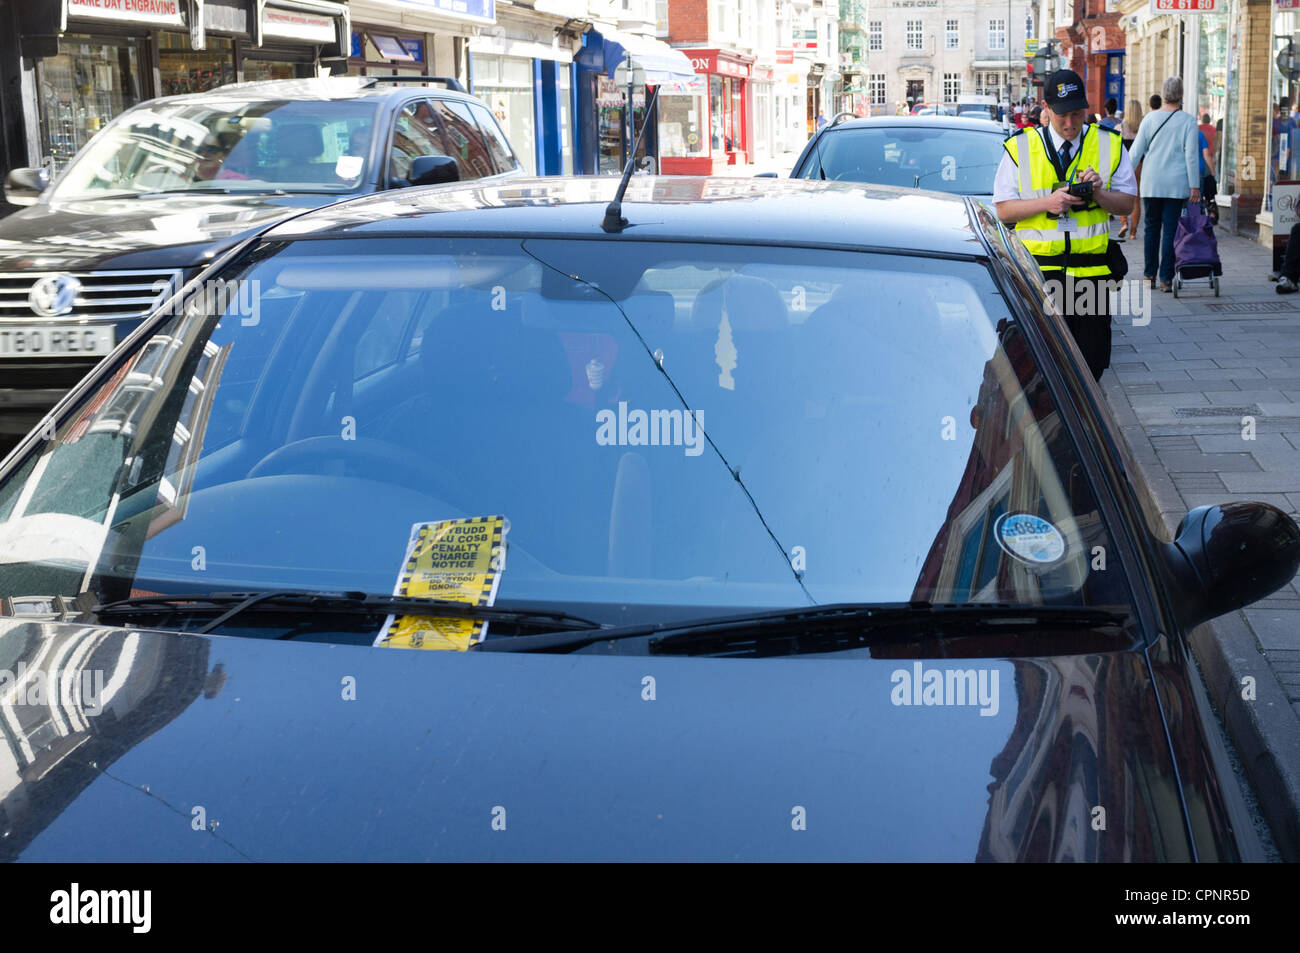 29/05/2012. Aberystwyth, UK. After over 12 months without police traffic wardens, the new local authority-employed Civil Parking Enforcement team return to the streets of the West Wales town. Initially only writing warning notices, they will begin issuing fixed penalty fines from June 4th.  Stock Photo